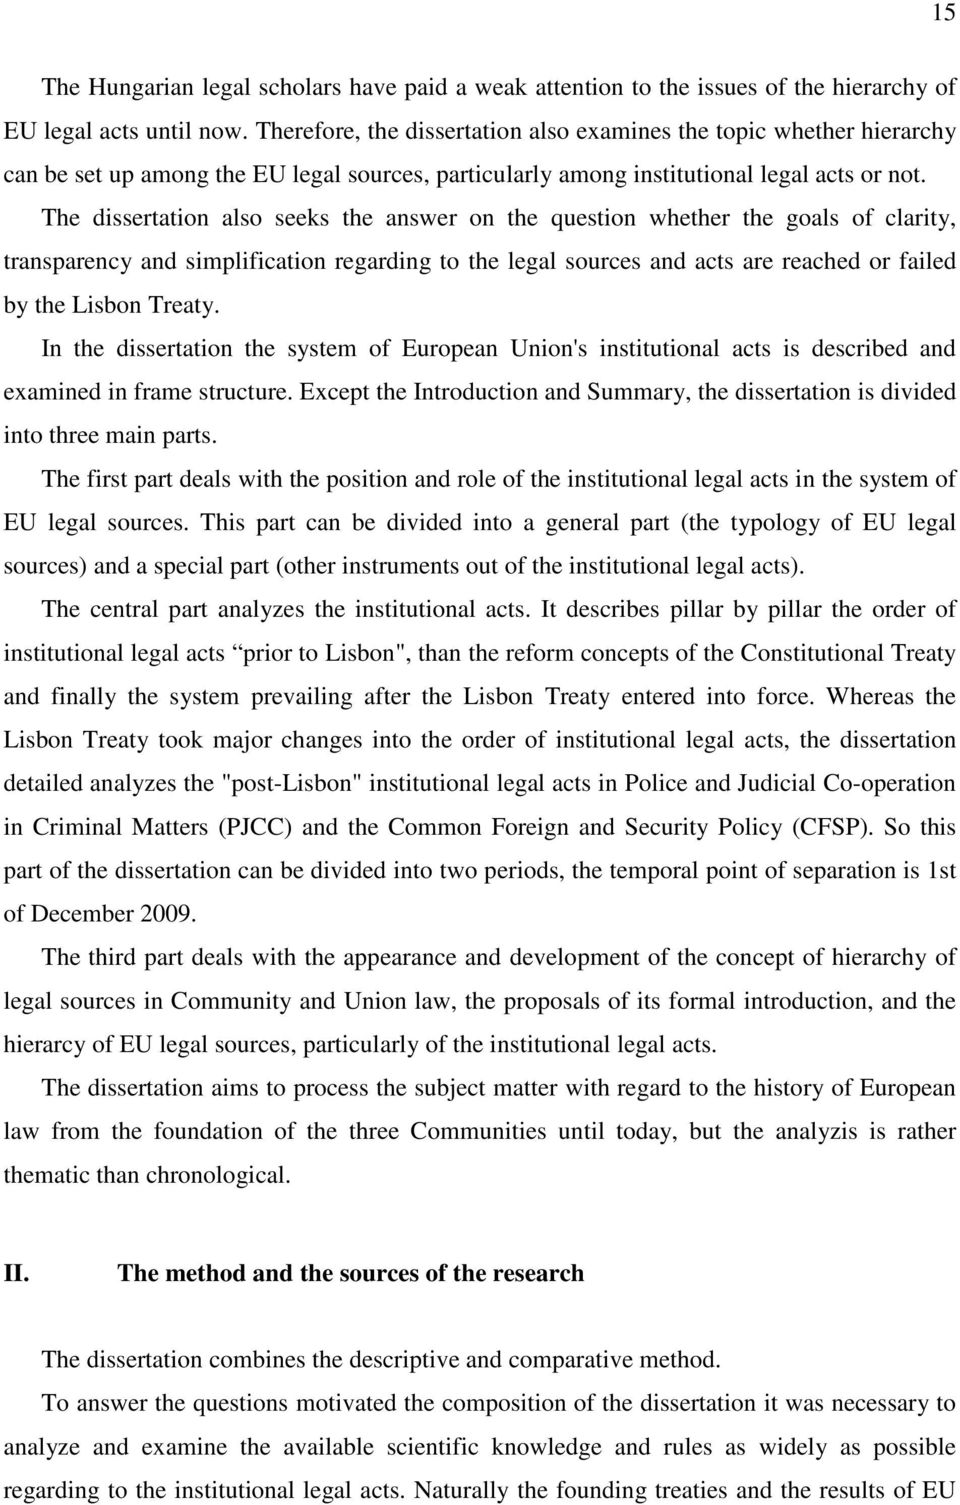 The dissertation also seeks the answer on the question whether the goals of clarity, transparency and simplification regarding to the legal sources and acts are reached or failed by the Lisbon Treaty.